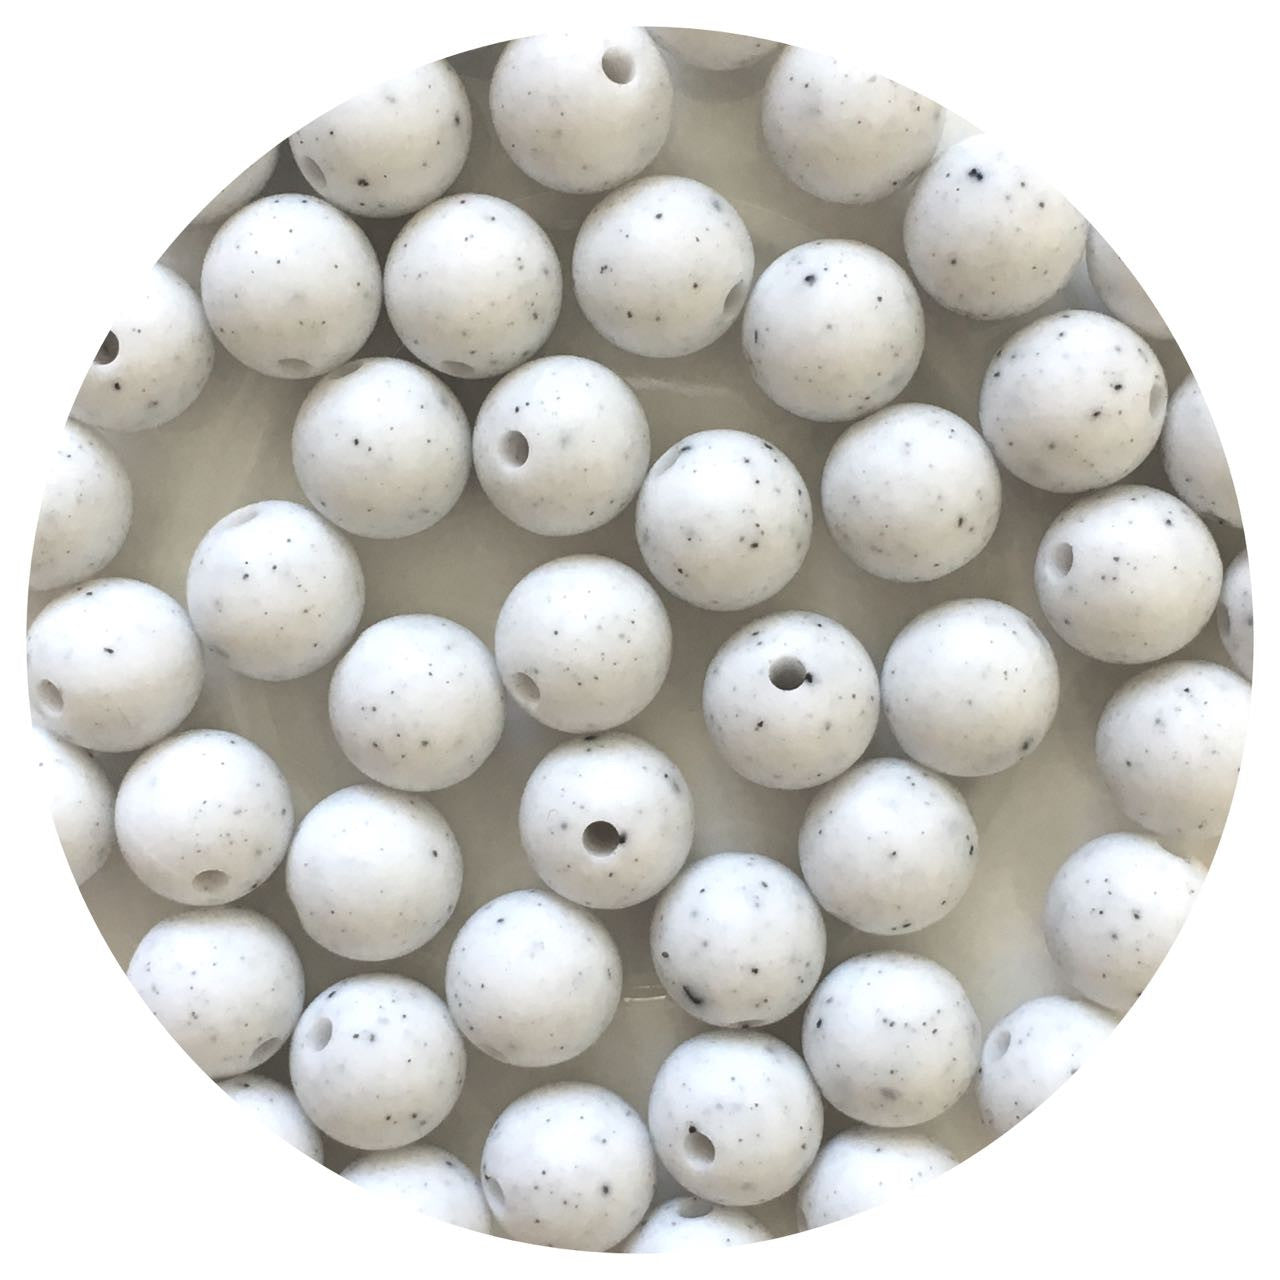 White Speckled - 12mm Round Silicone Beads - 10 beads